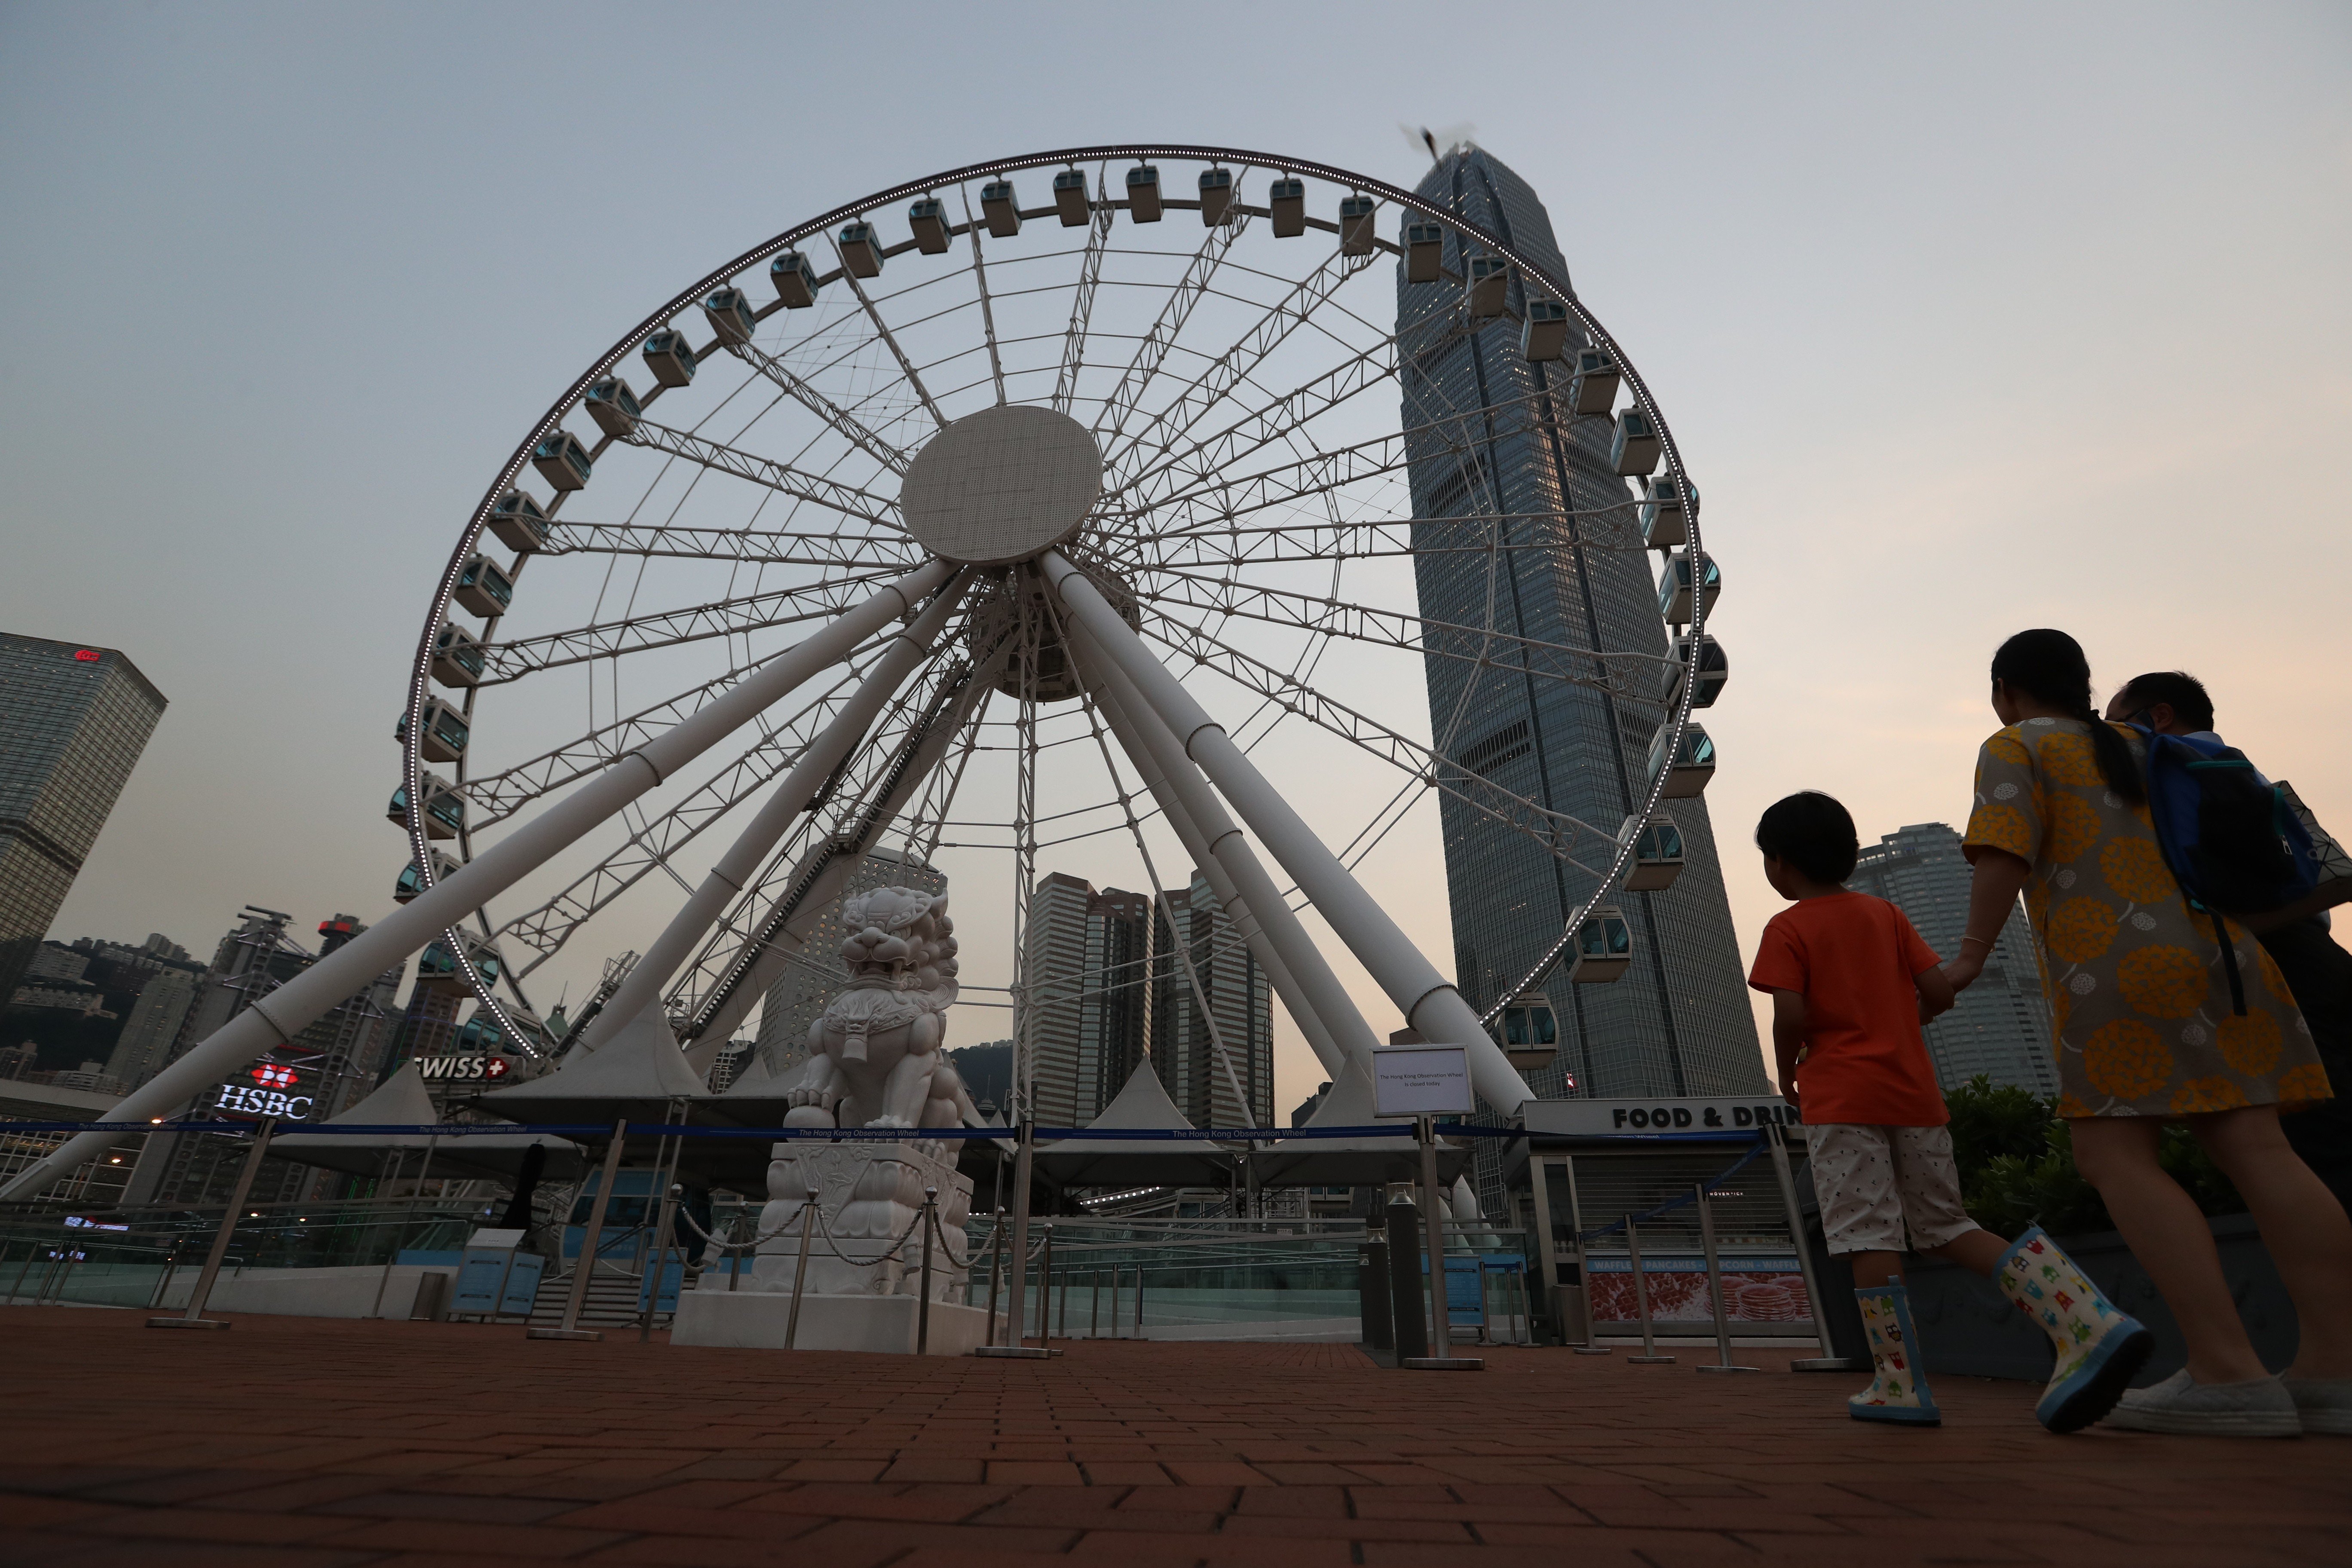 The attraction located on the Central Harbourfront closed suddenly last week. Photo: Nora Tam